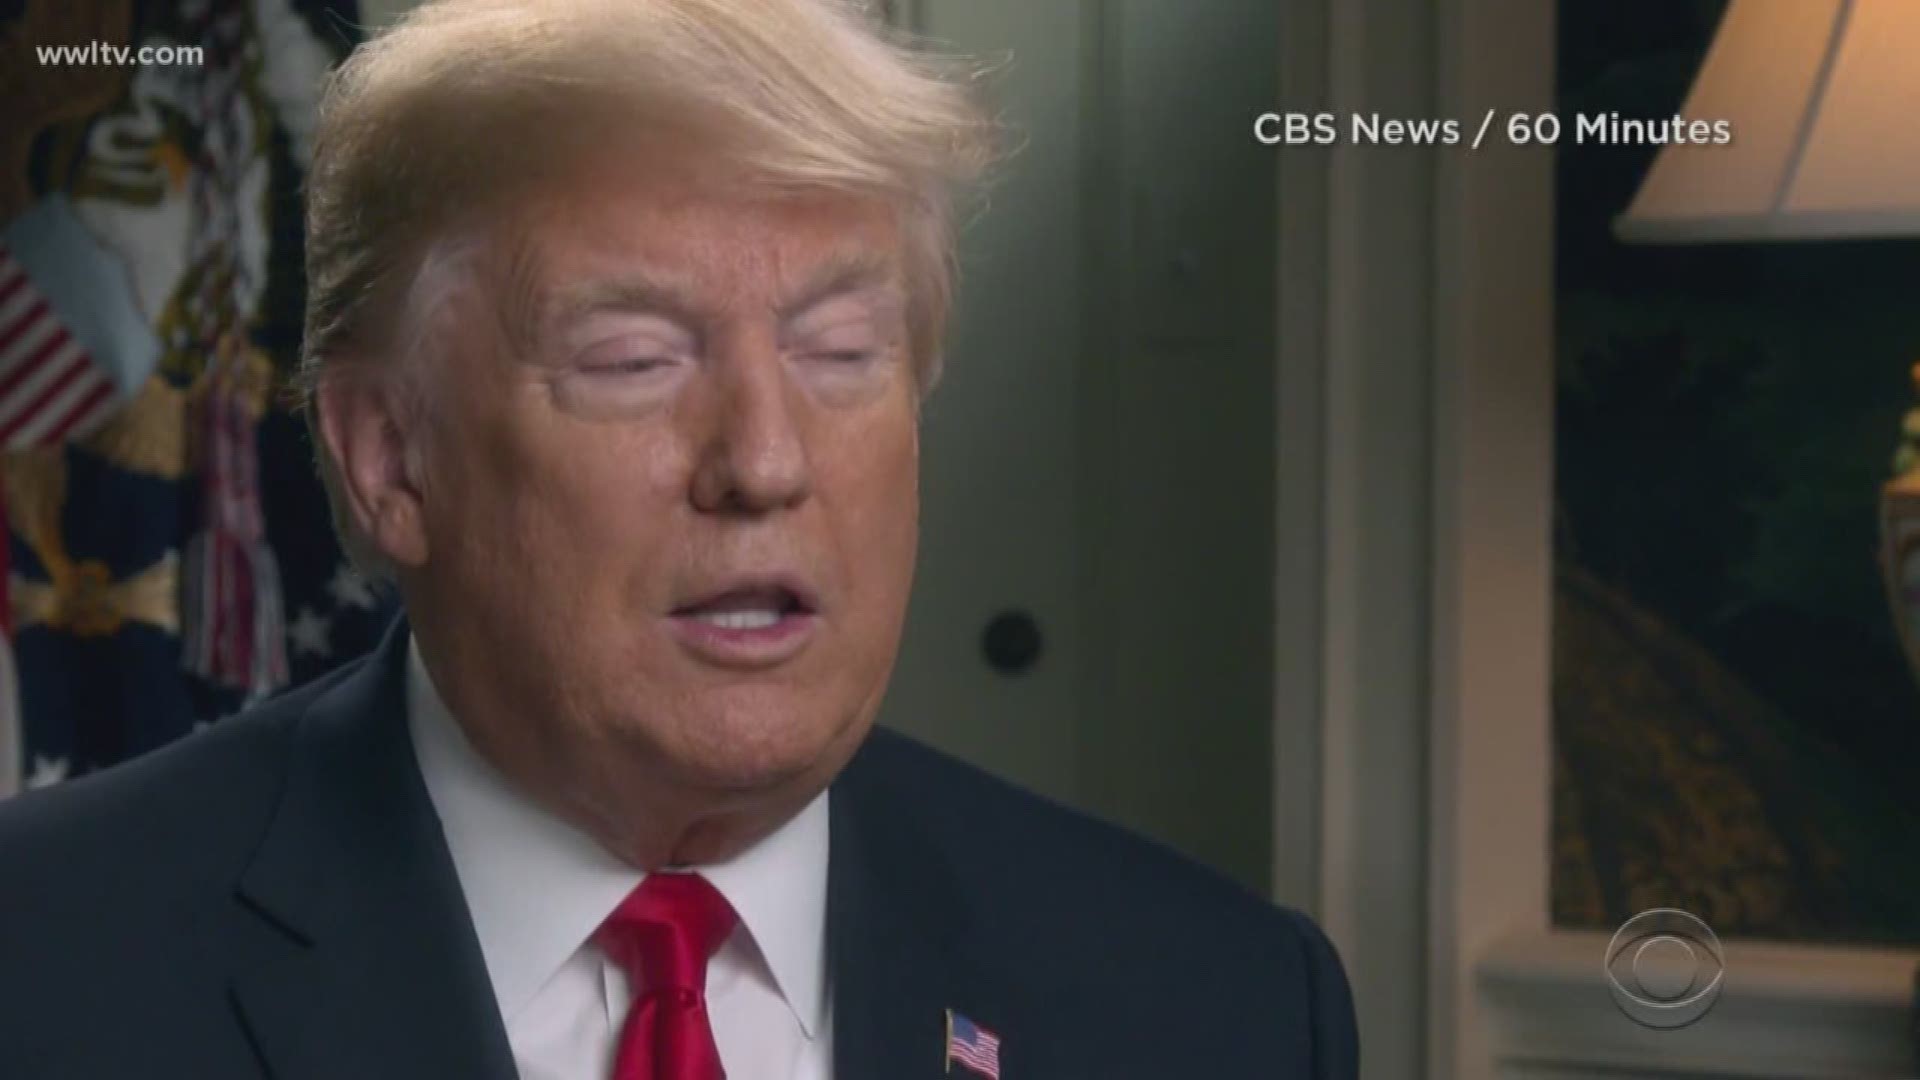 John Schiumo gives insight of the President Trump interview done by 60 minutes.